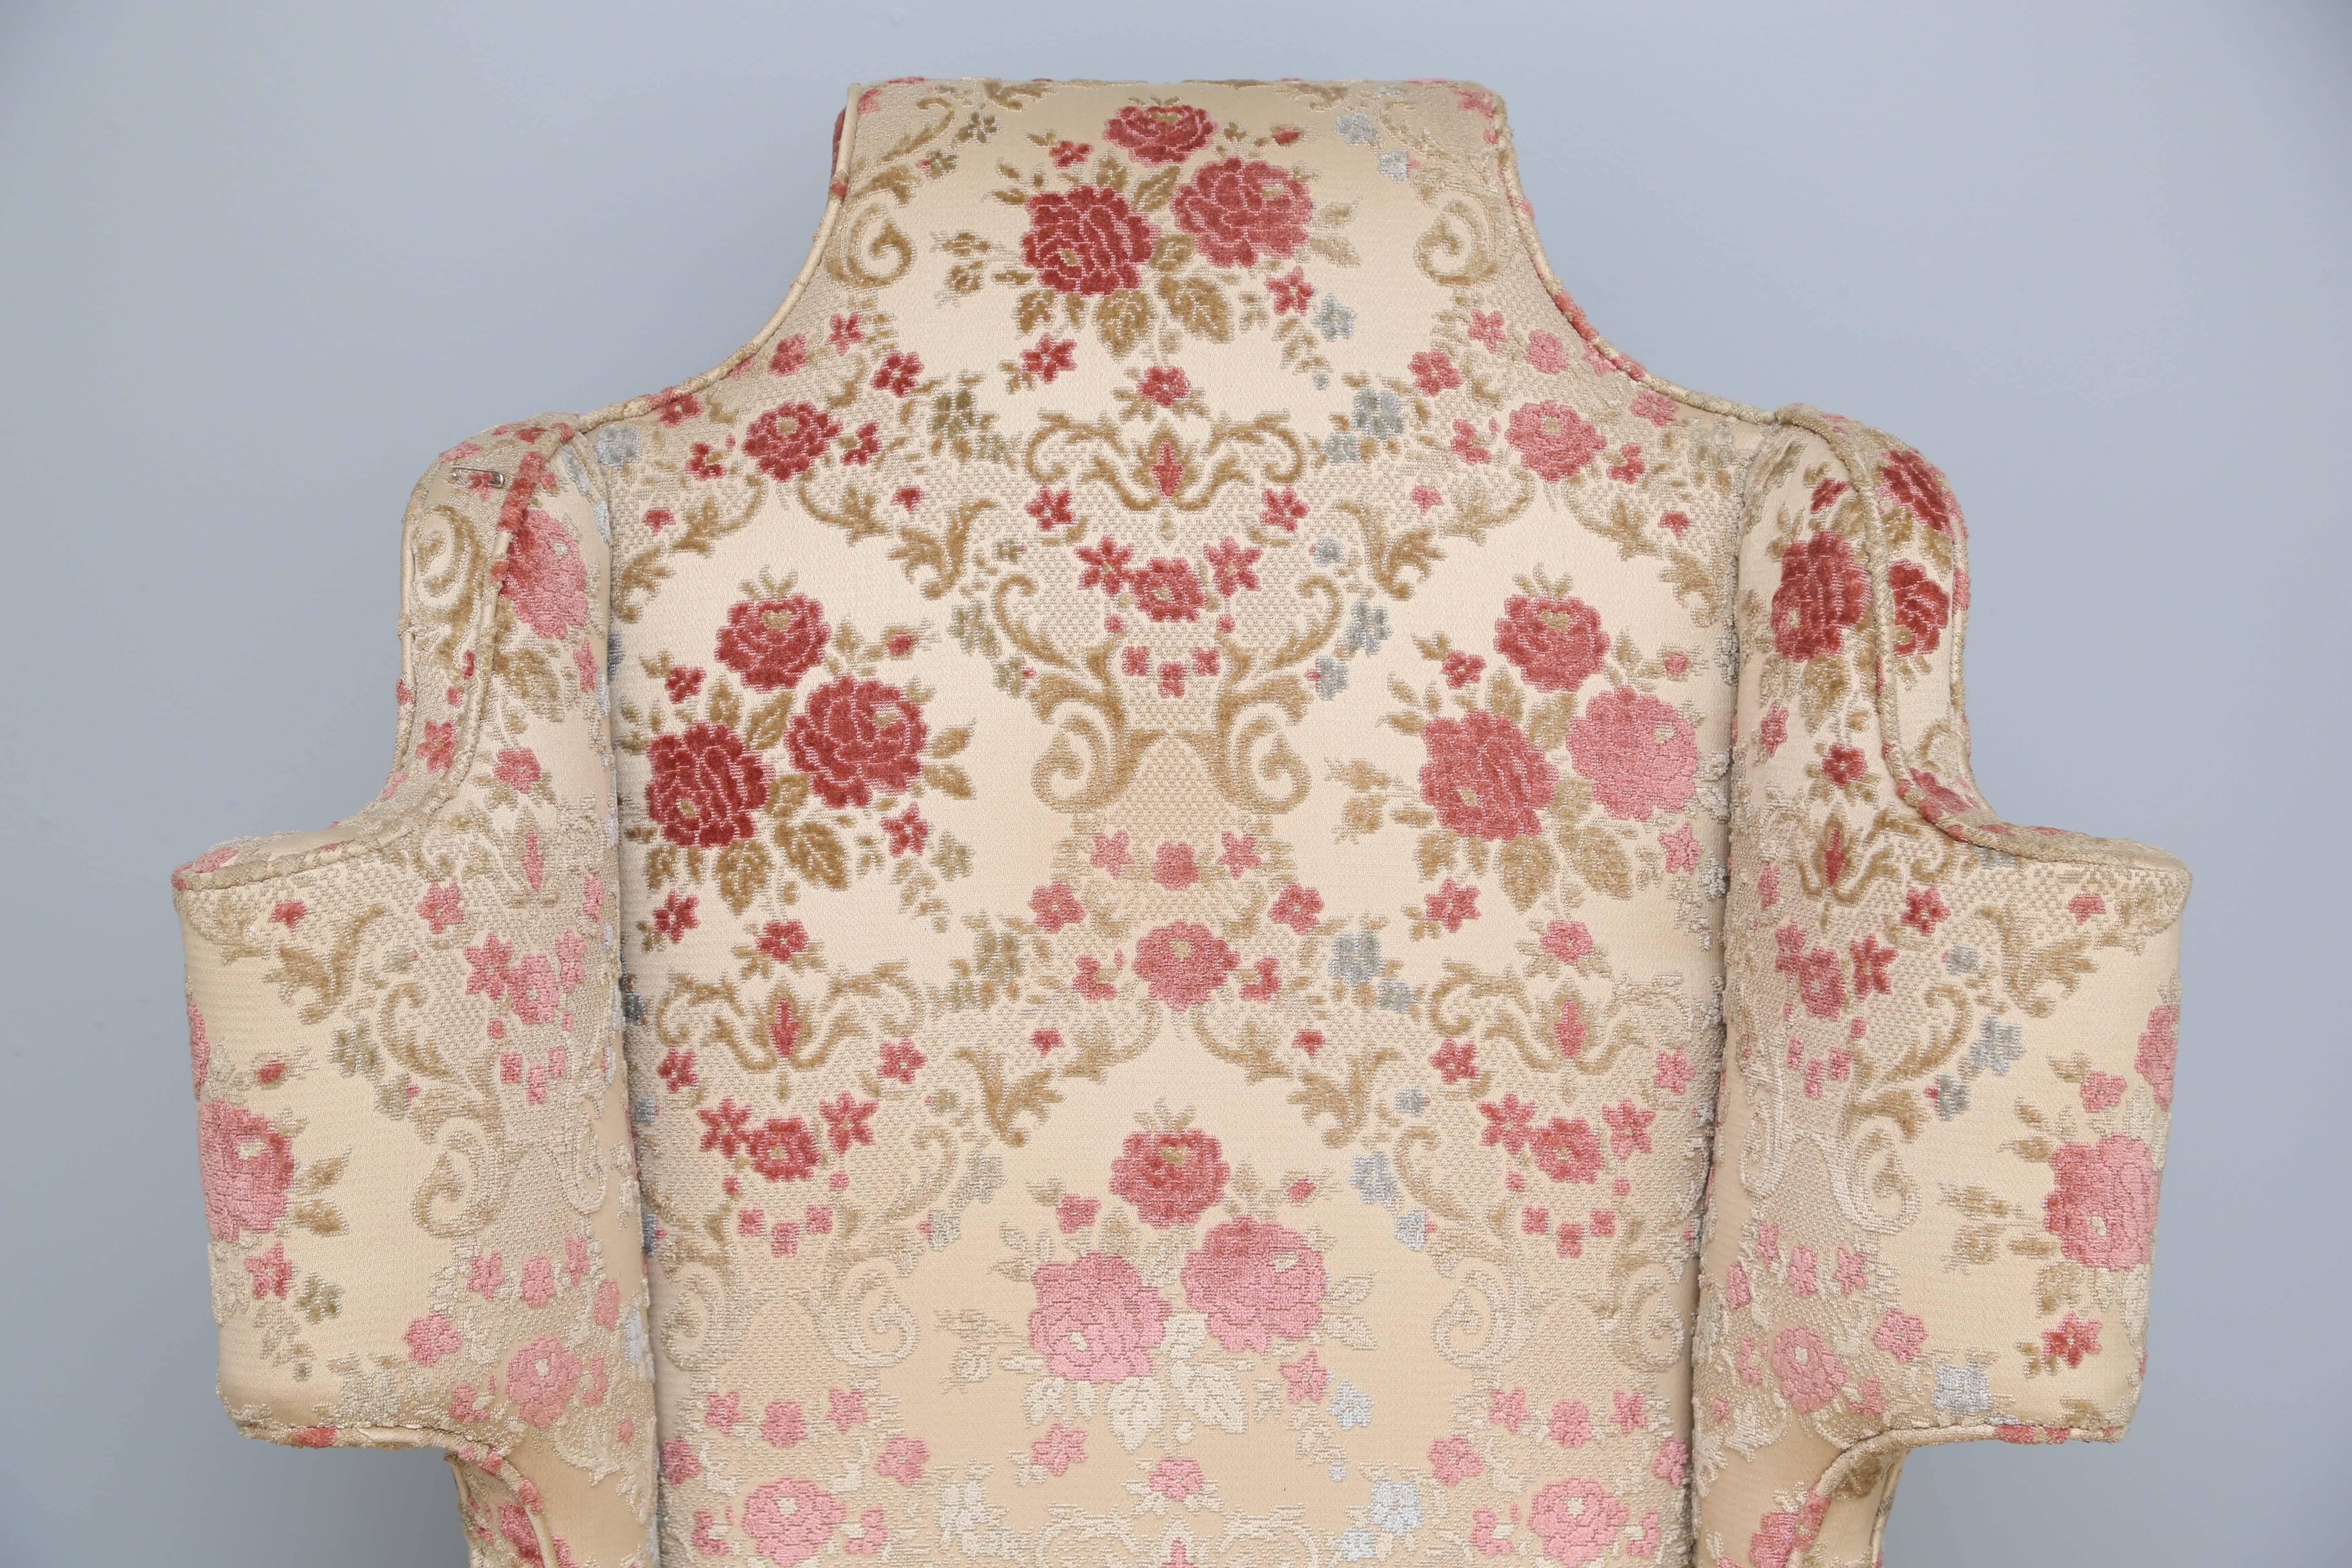 English Dynamic Queen Anne Style Chair with Floral Upholstery For Sale